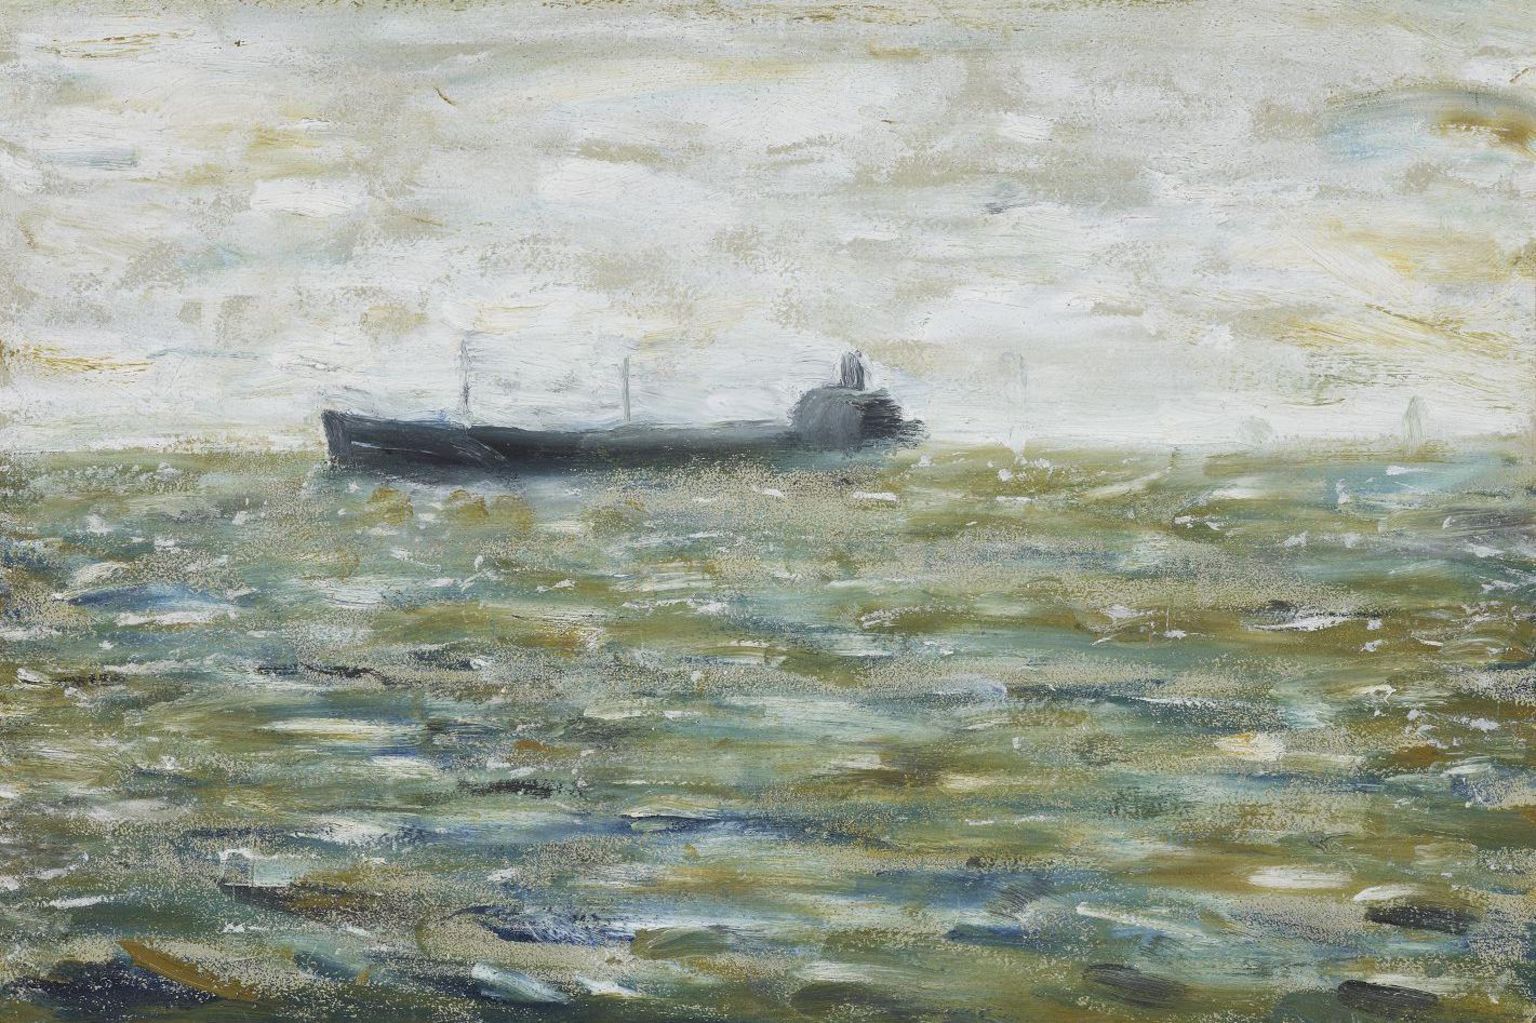 Image of LS Lowry’s painting Tanker.